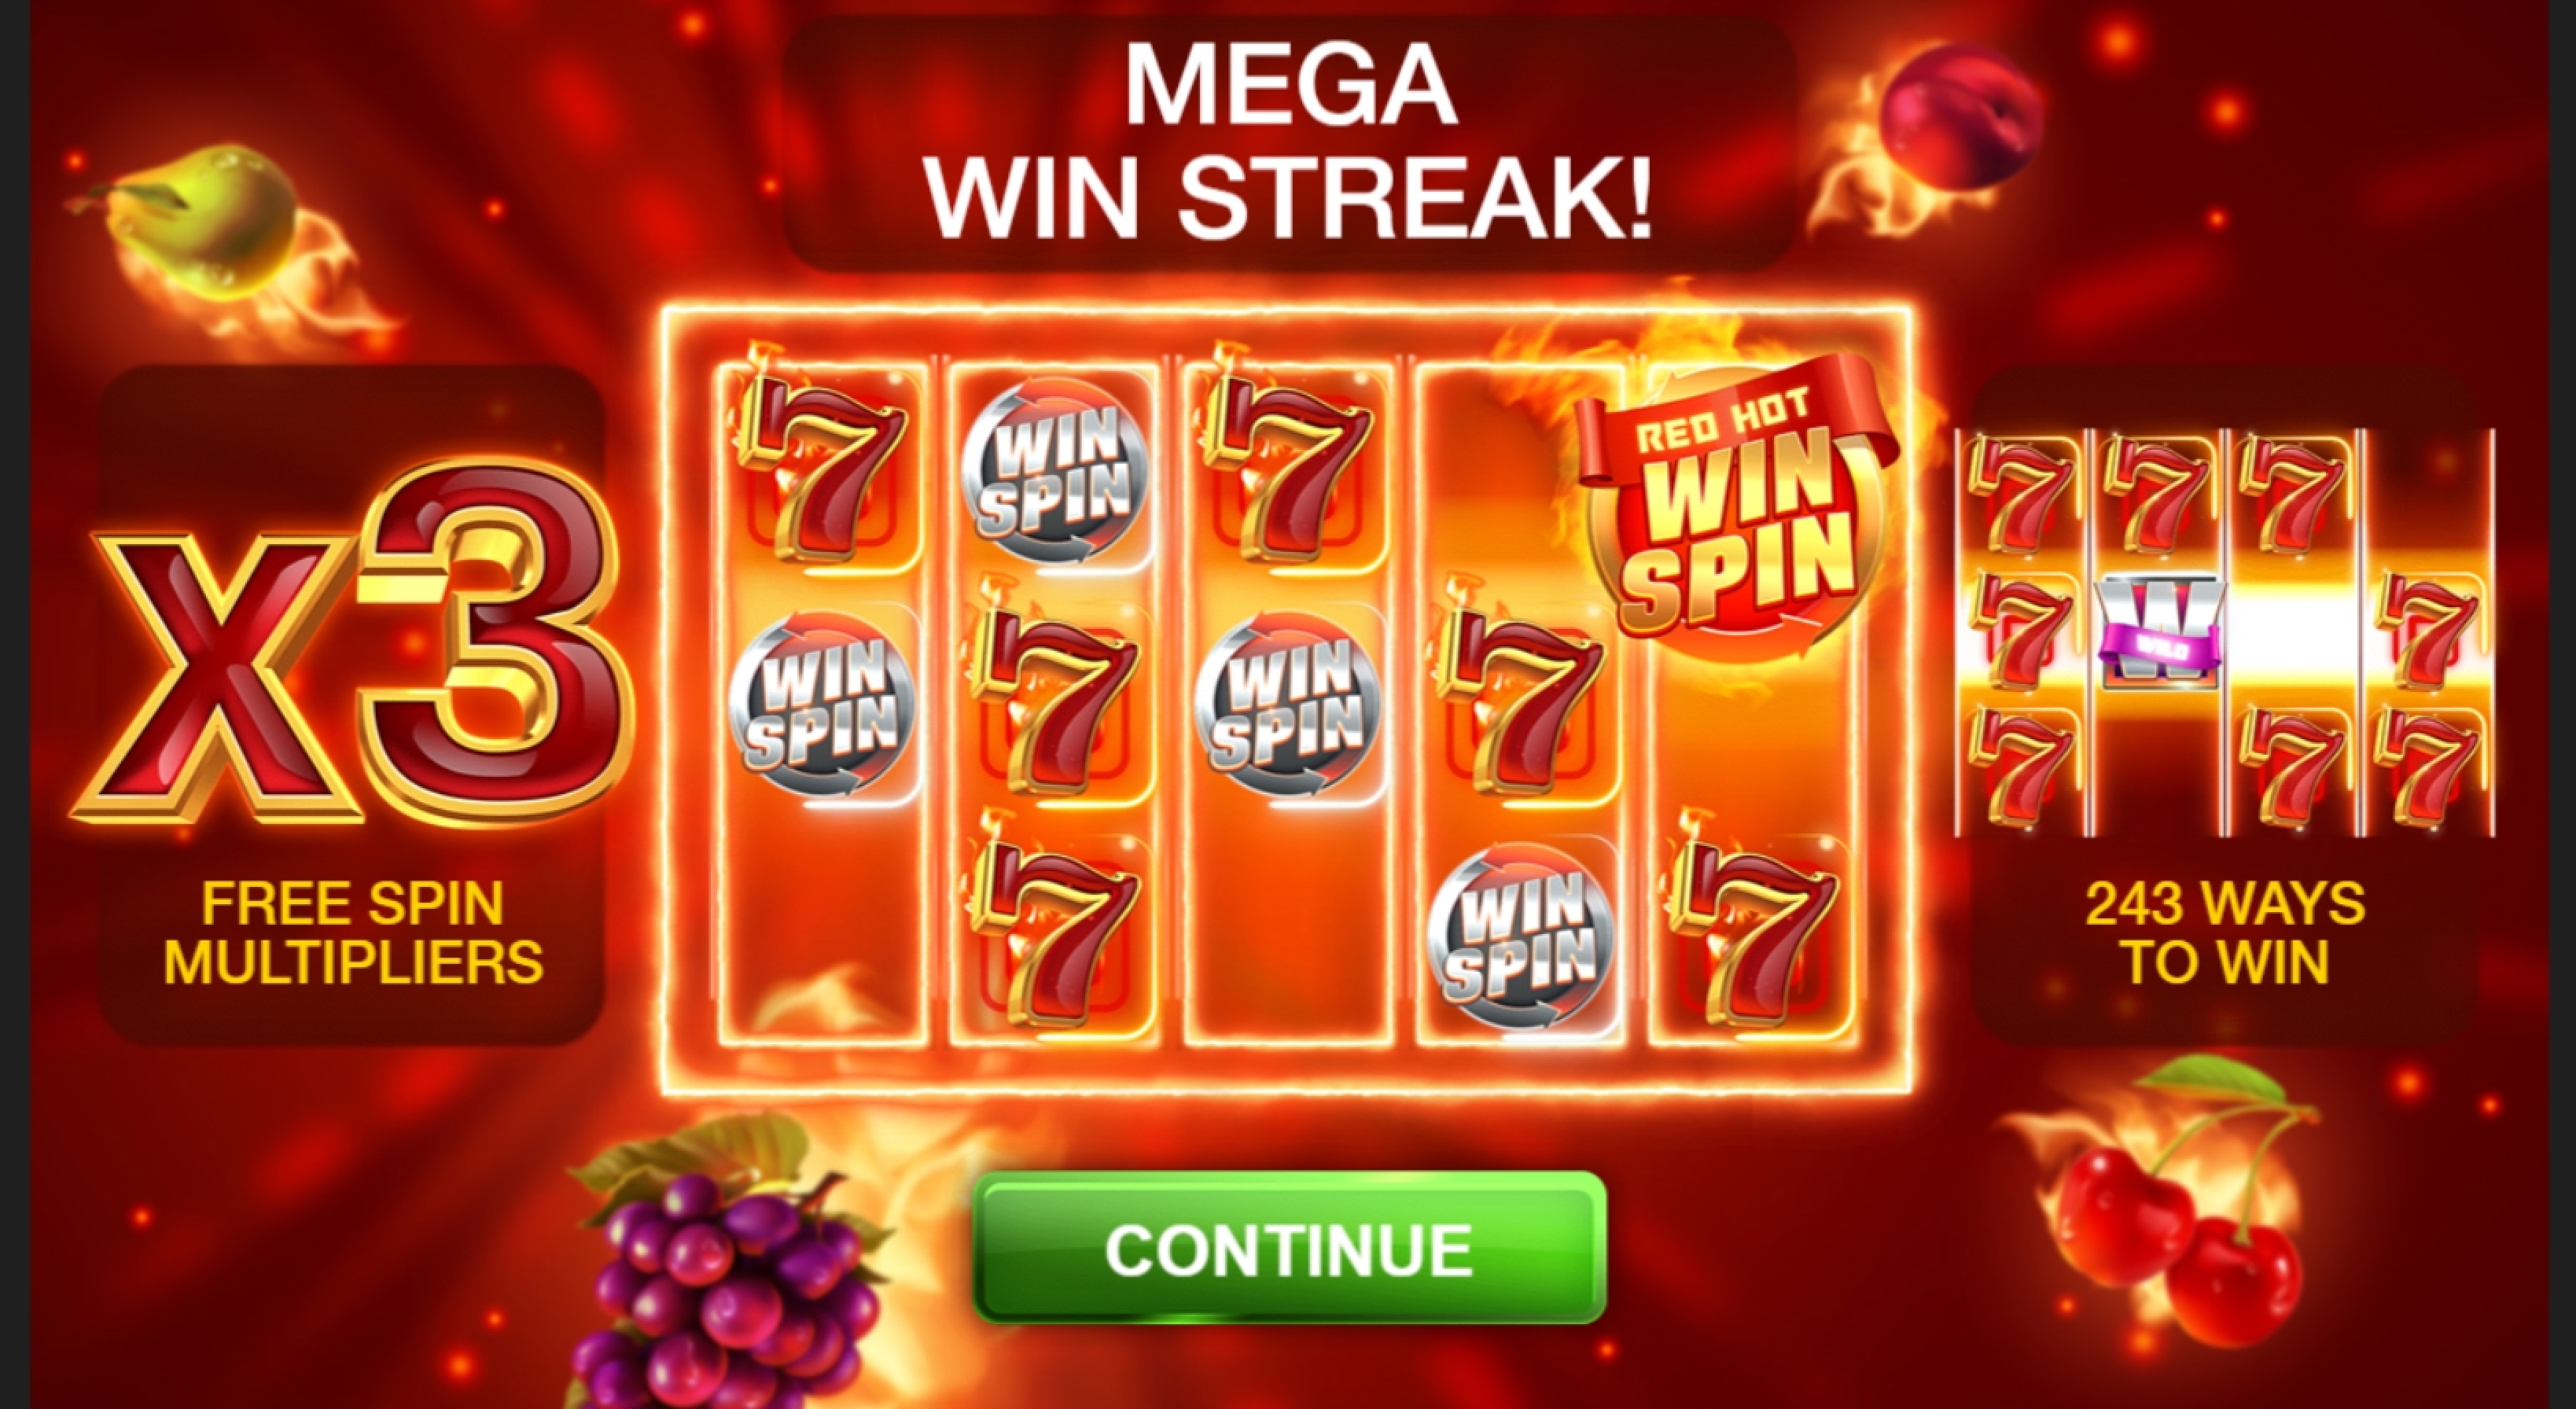 Play Red Hot Win Spin Free Casino Slot Game by Probability Jones